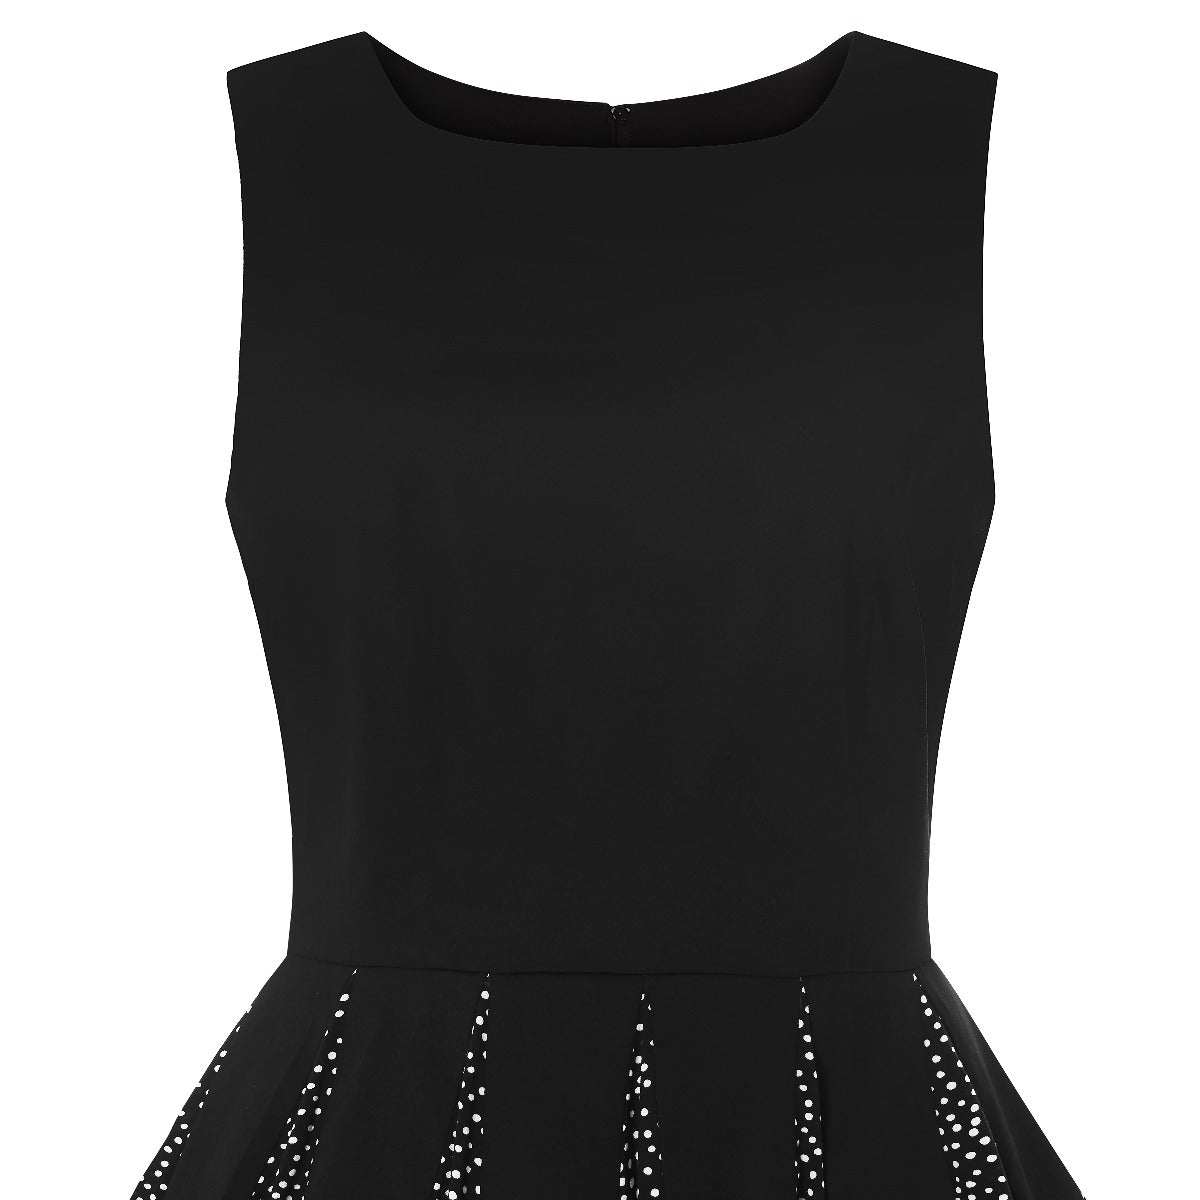 Judith sleeveless dress, in black, with white polka dots on alternate skirt panels, close up view